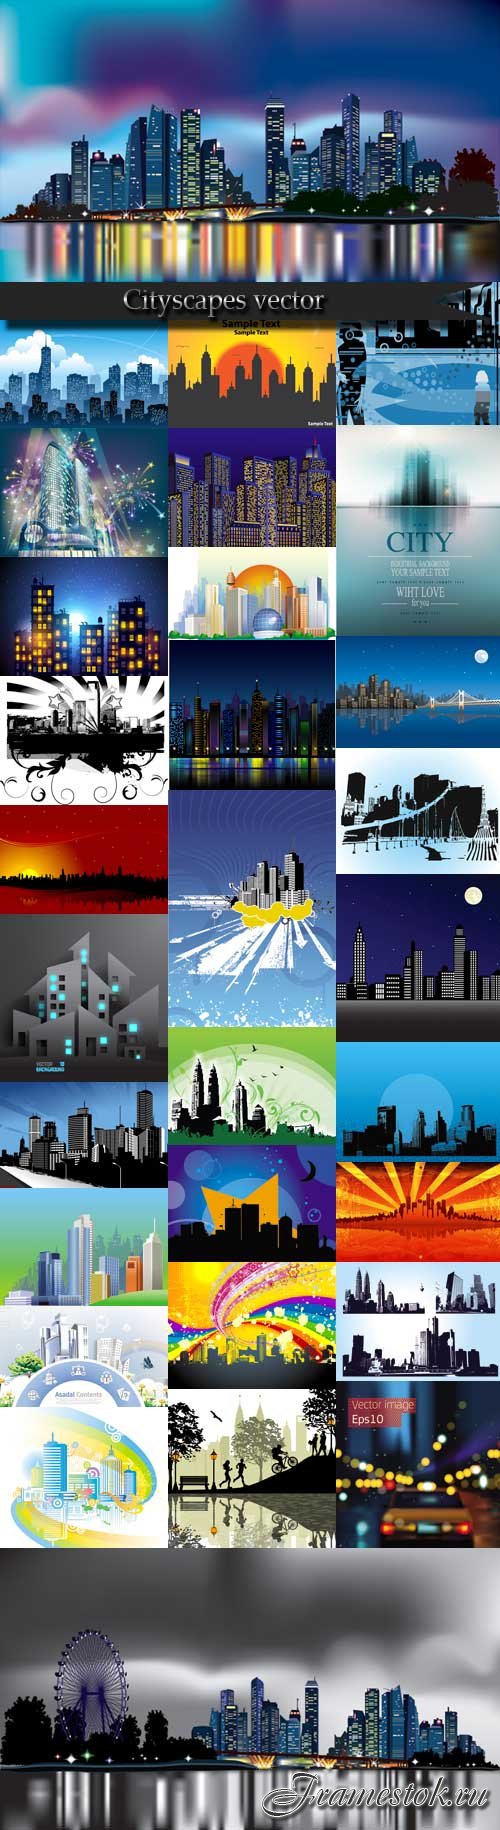 Cityscapes vector